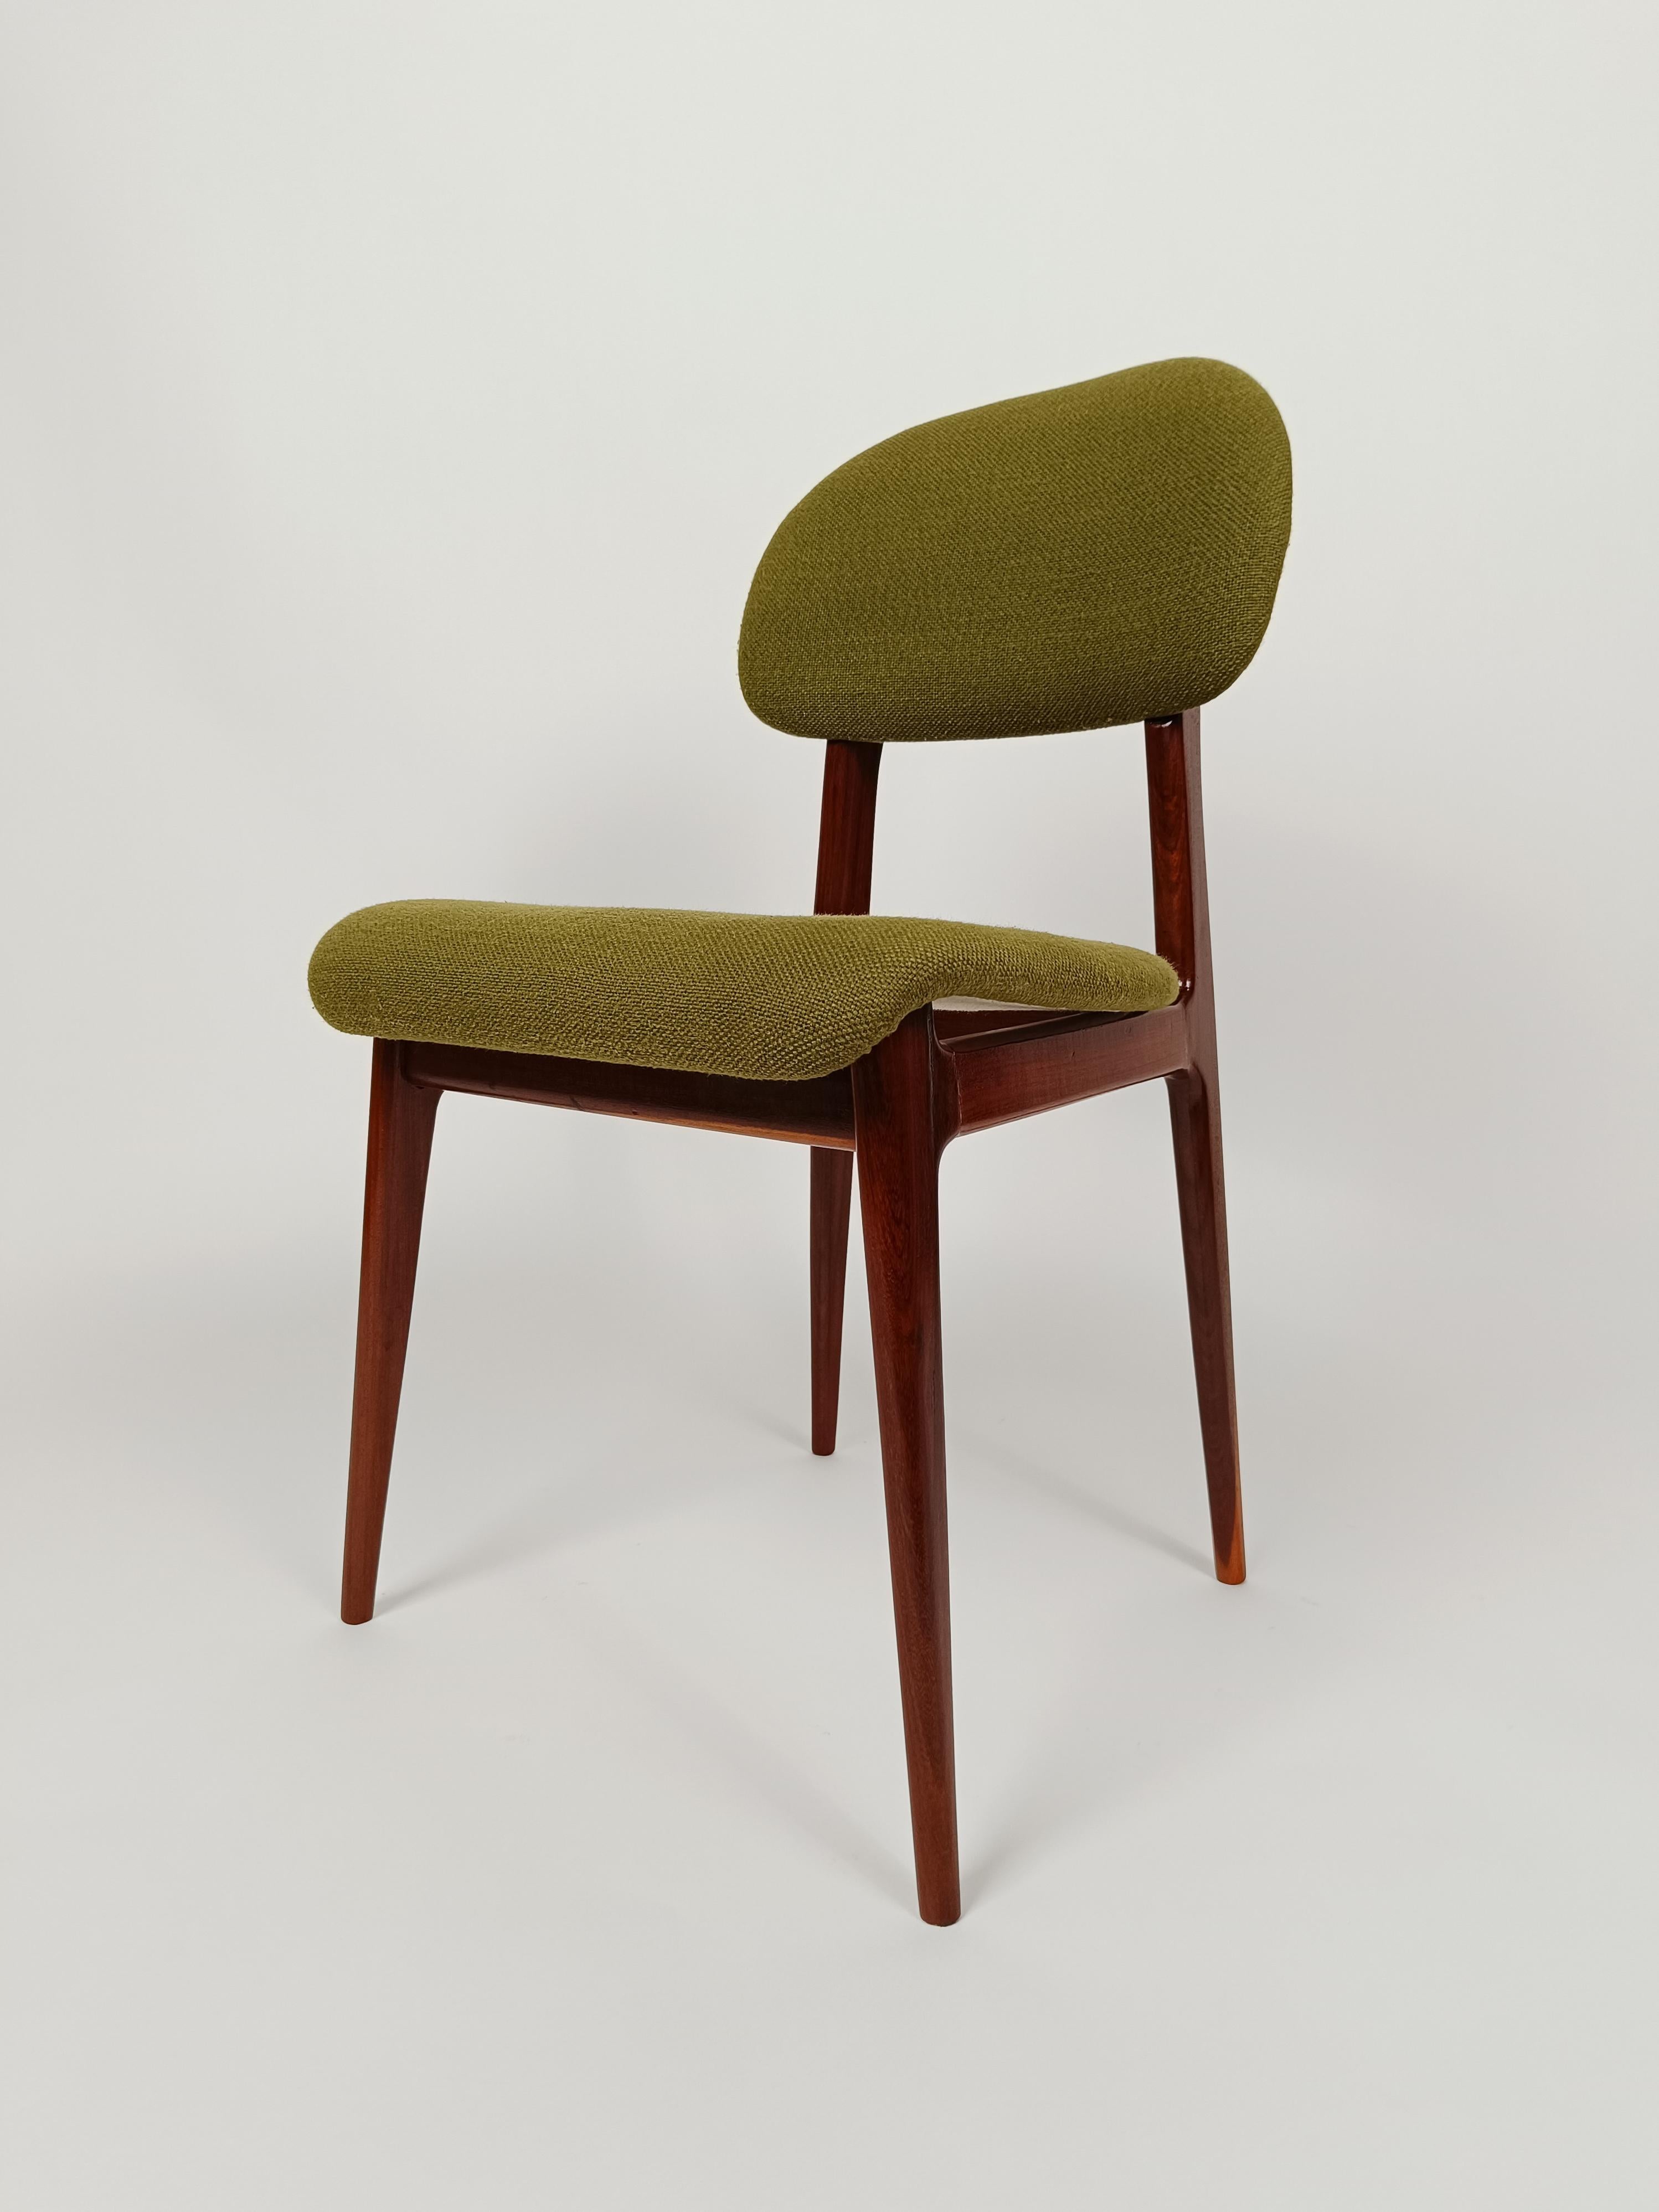 Italian Midcentury Chairs Attributed to Carlo Hauner and Martin Eisler, 1960s For Sale 5